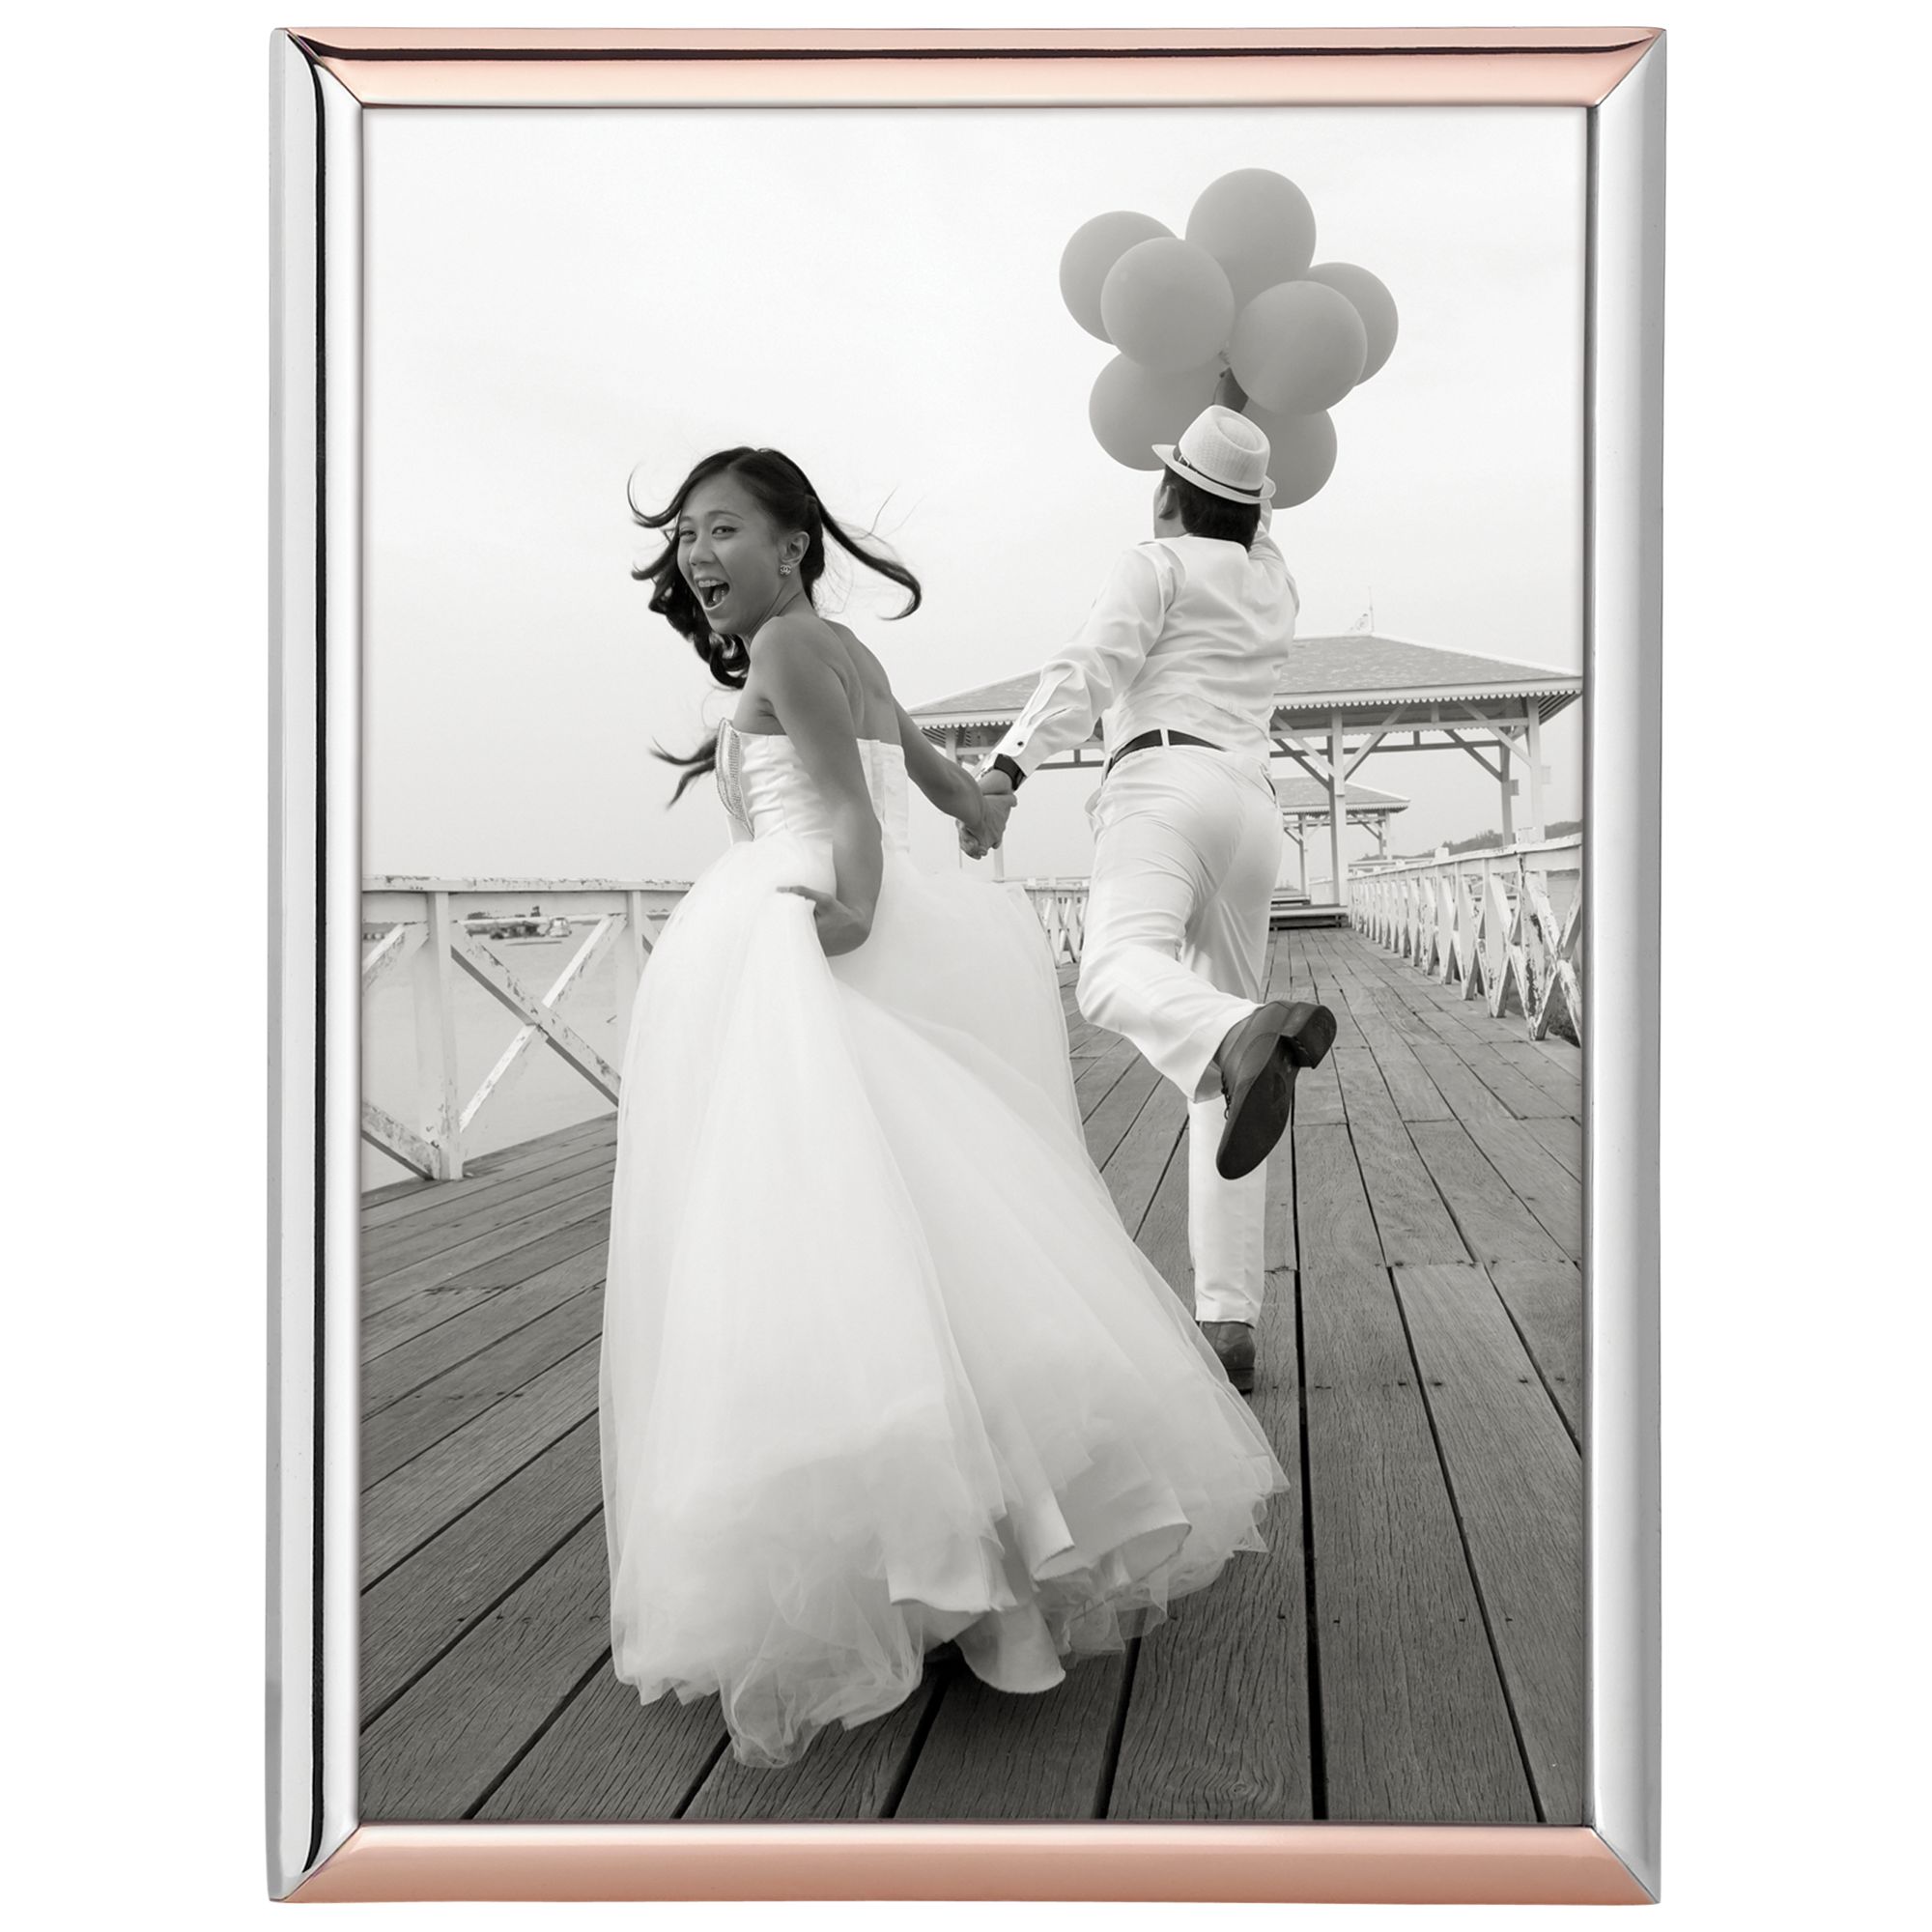 kate spade new york Rosy Glow Photo Frame, 5 x 7", Silver/ Rose